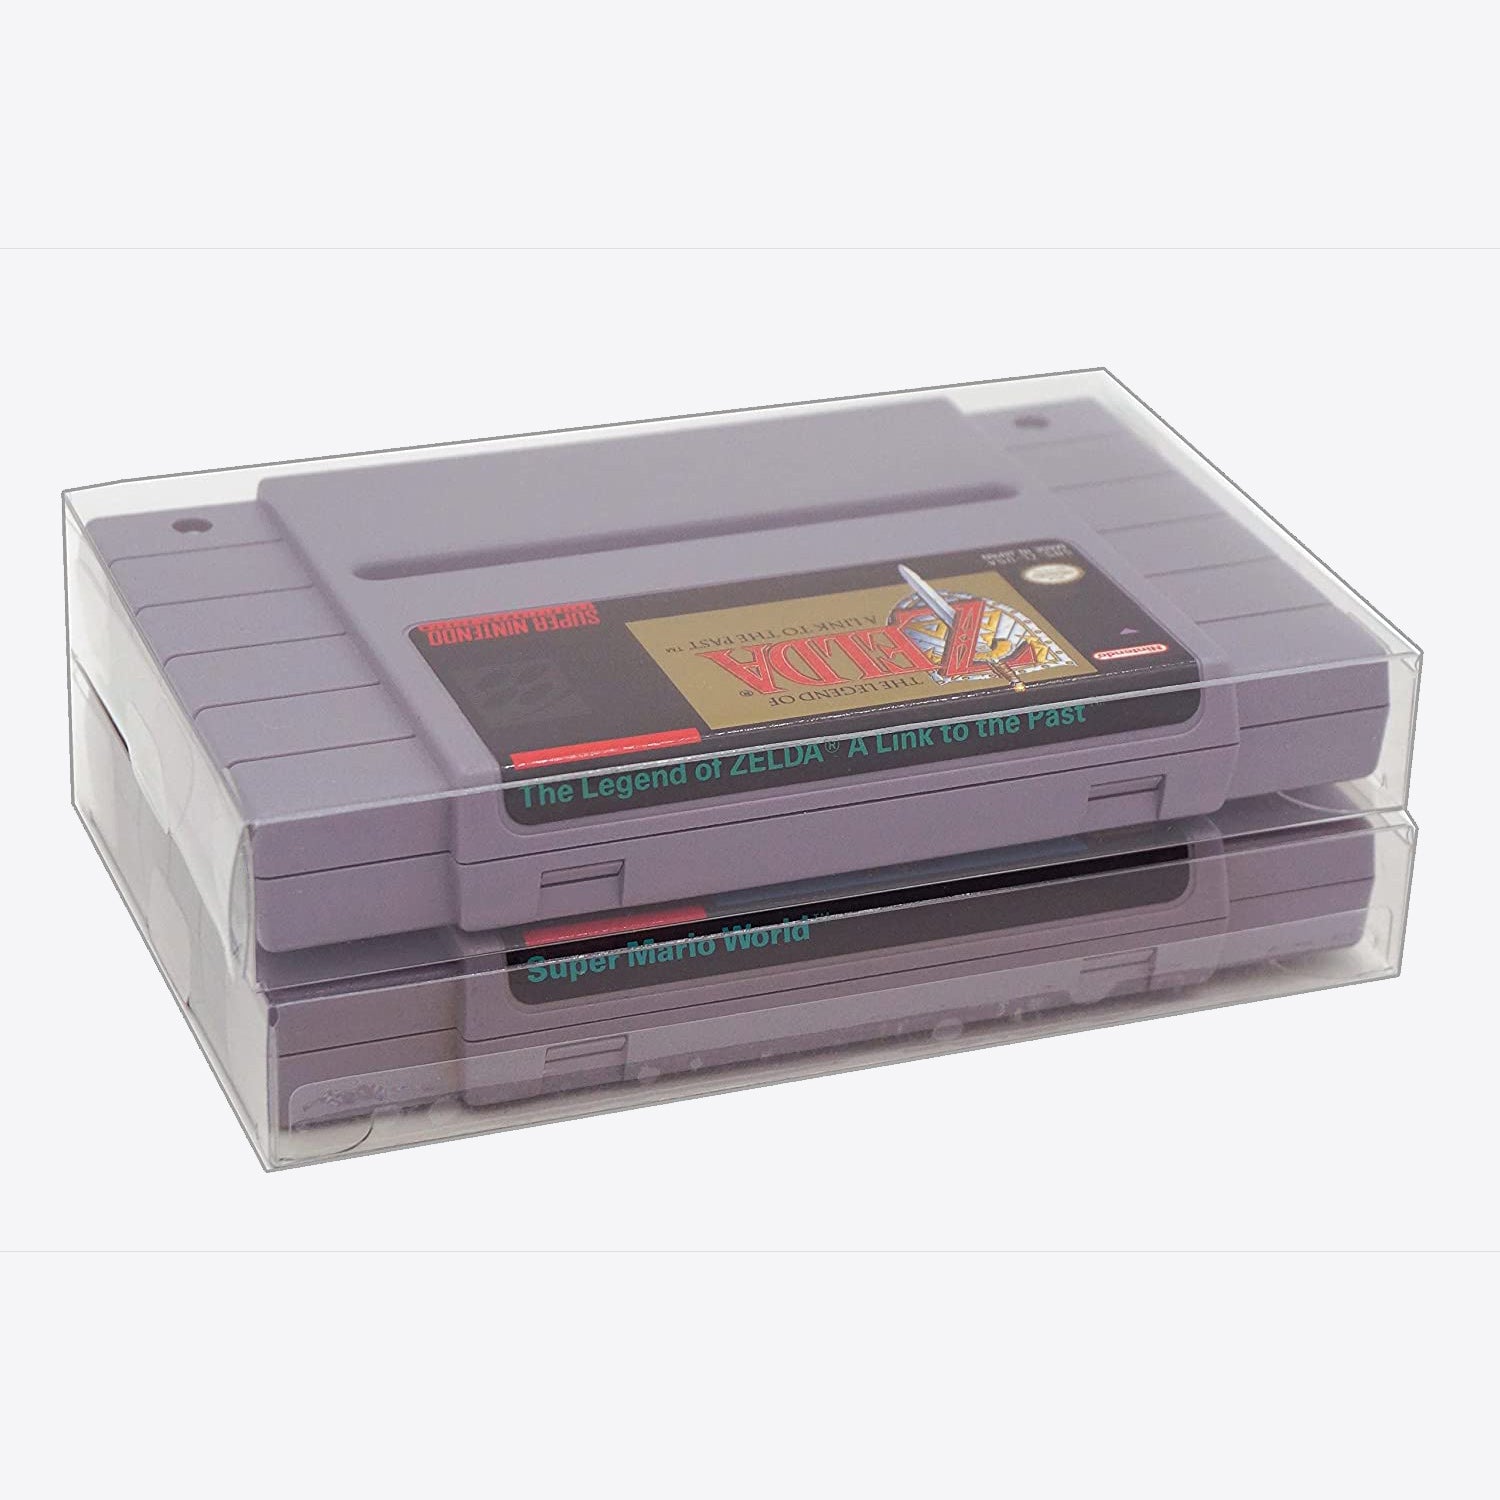 10 Pack Cartridge Protector Case